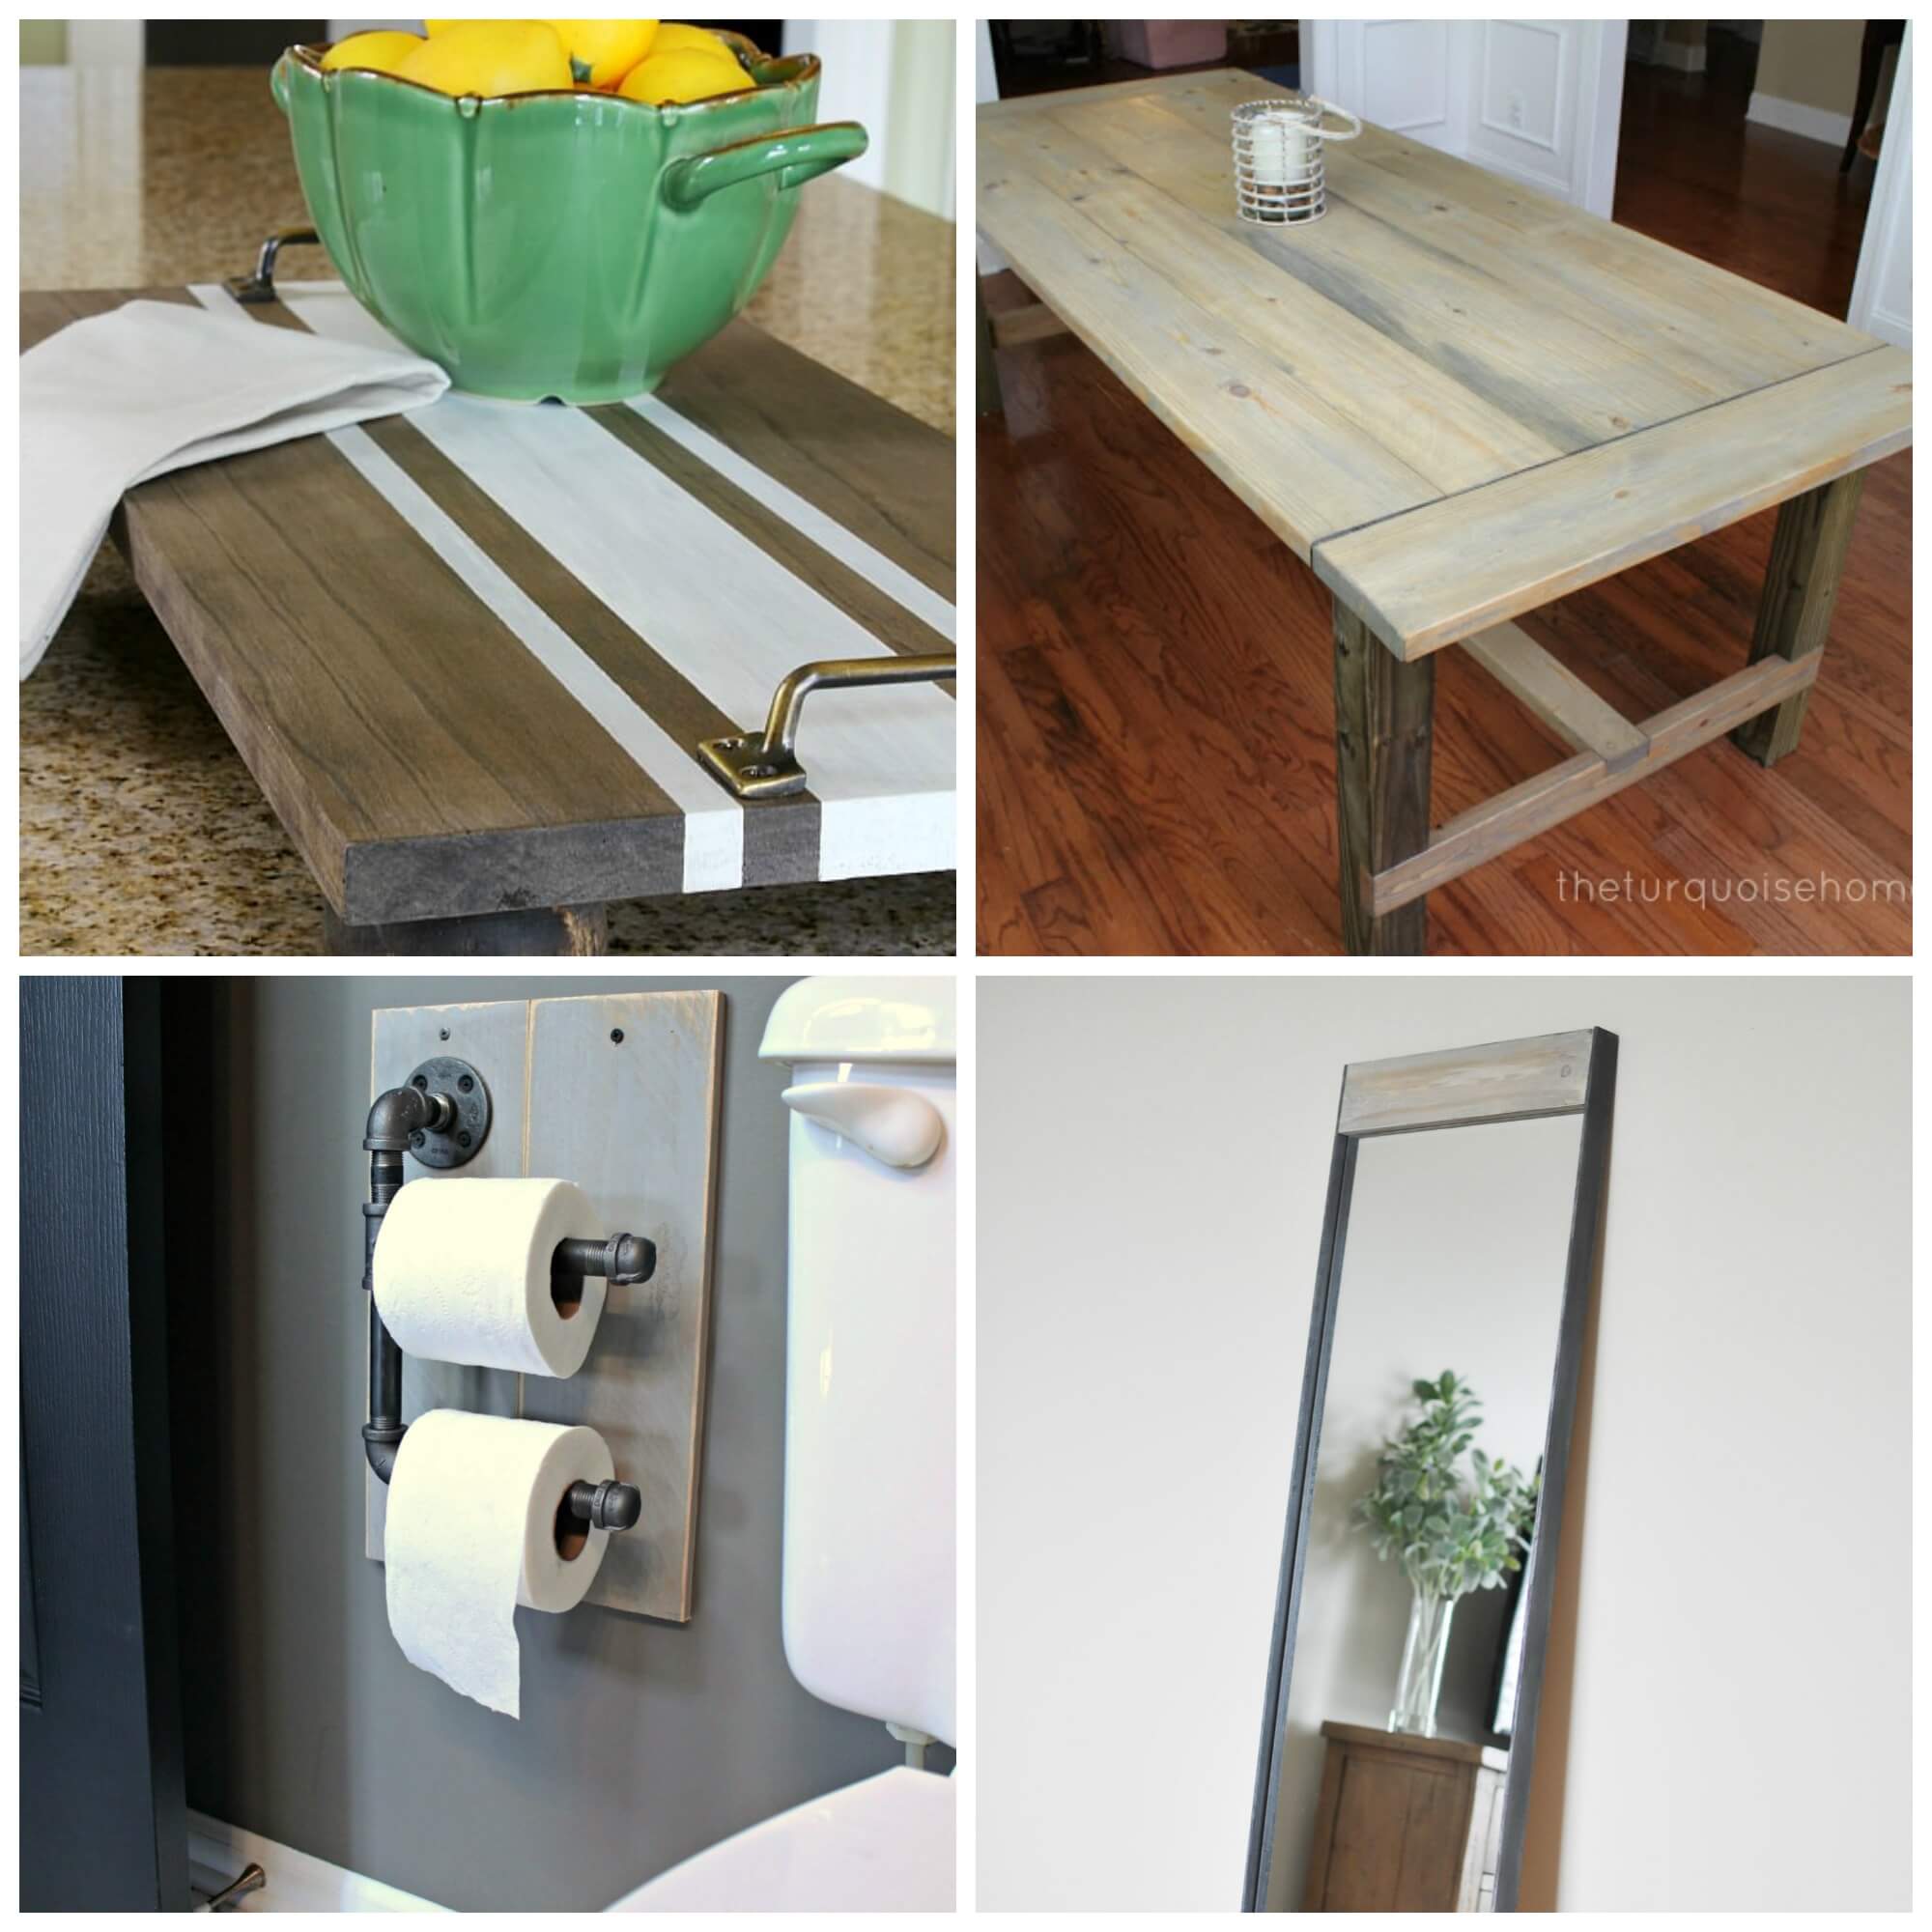 I love finding new DIY projects for the home. Become a do it yourself pro with these simple projects! Check them out and maybe make a few for yourself!